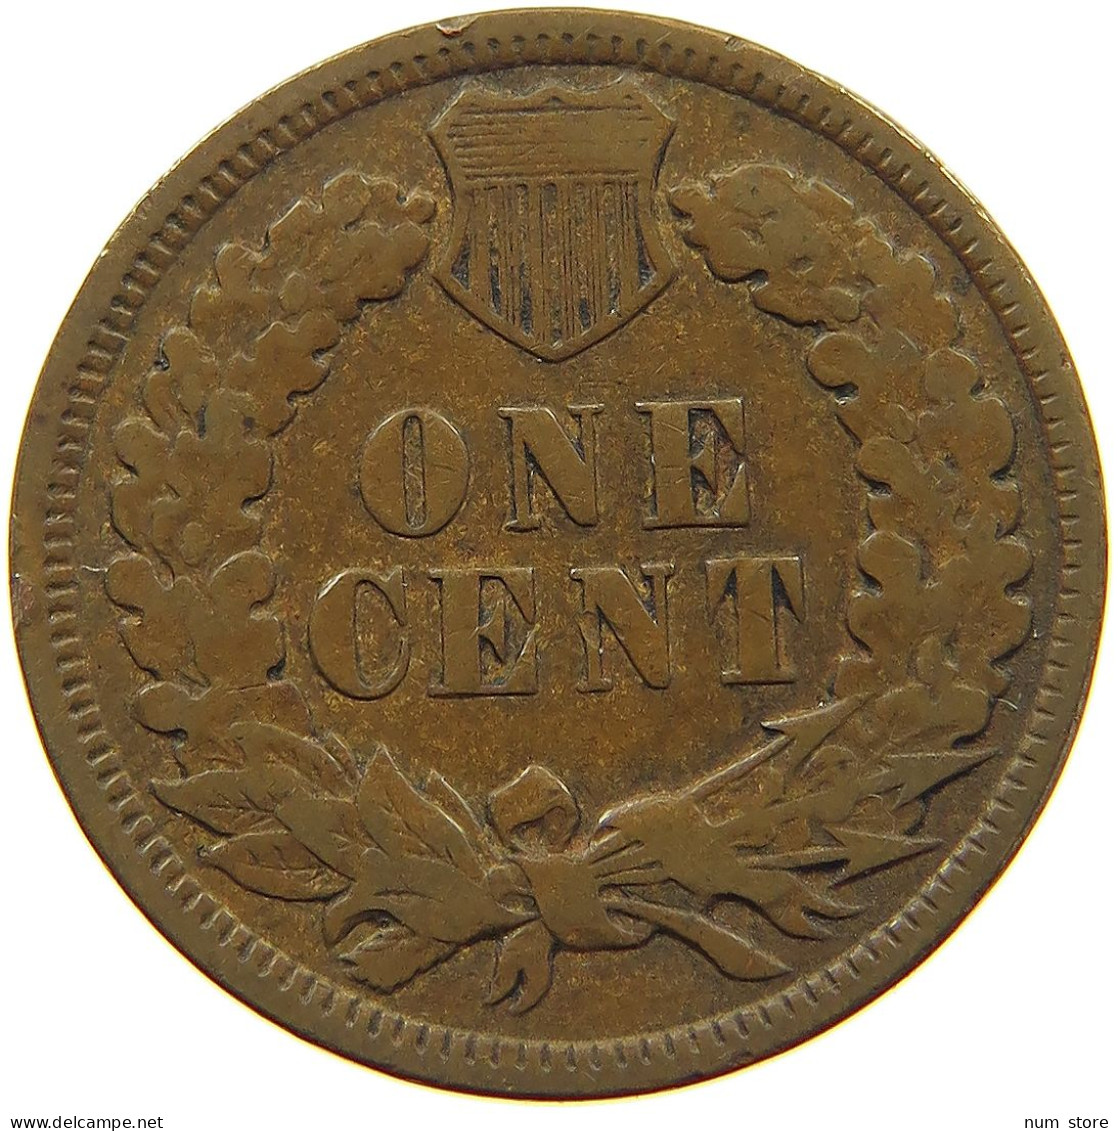 UNITED STATES OF AMERICA CENT 1898 INDIAN HEAD #s063 0367 - 1859-1909: Indian Head